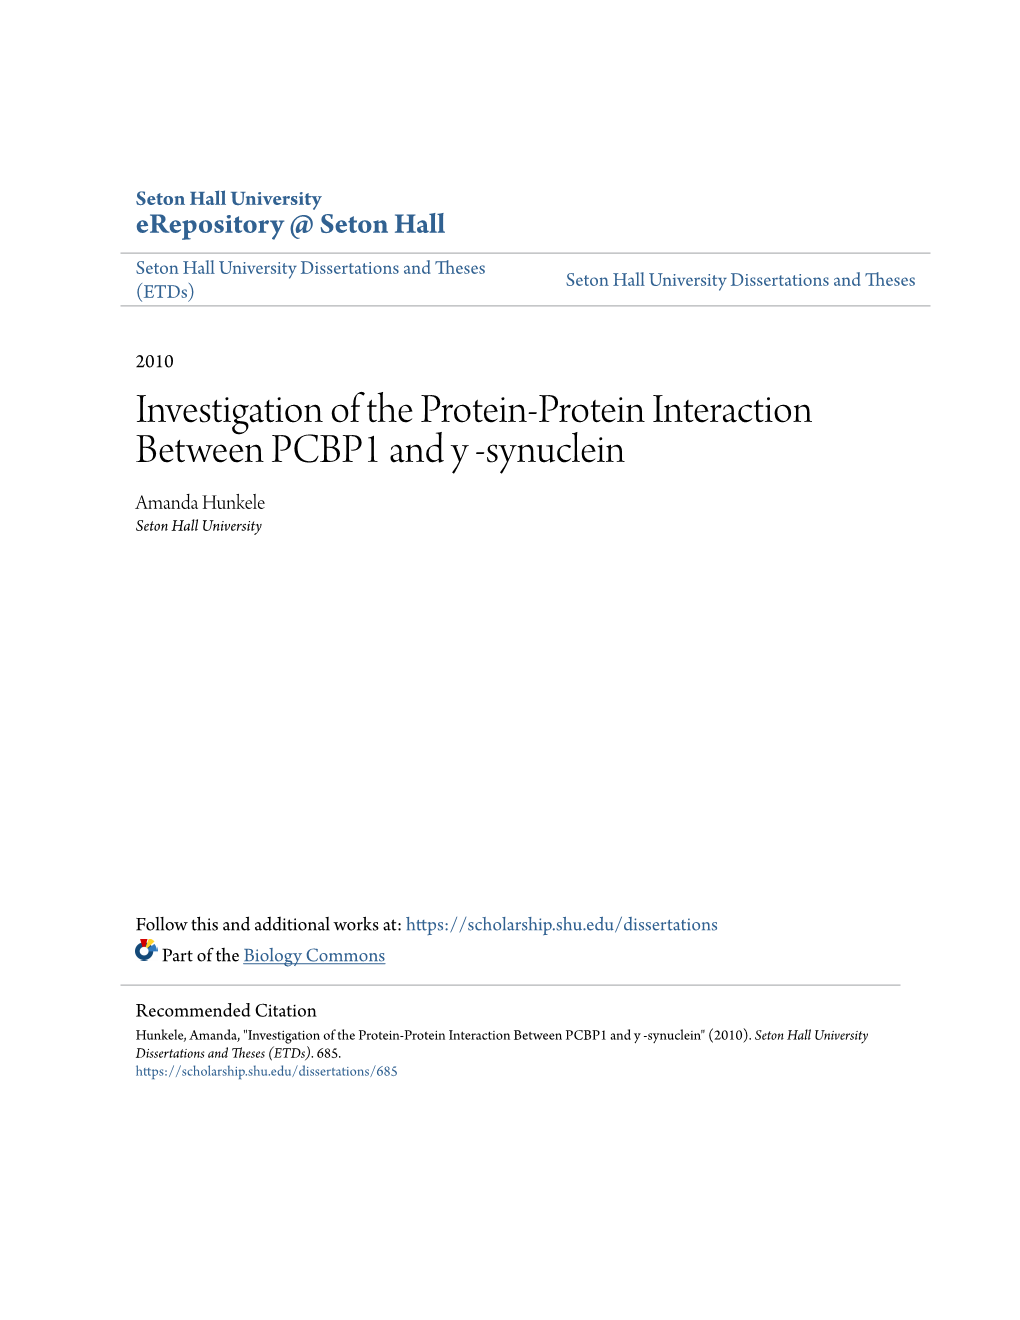 Investigation of the Protein-Protein Interaction Between PCBP1 and Y -Synuclein Amanda Hunkele Seton Hall University